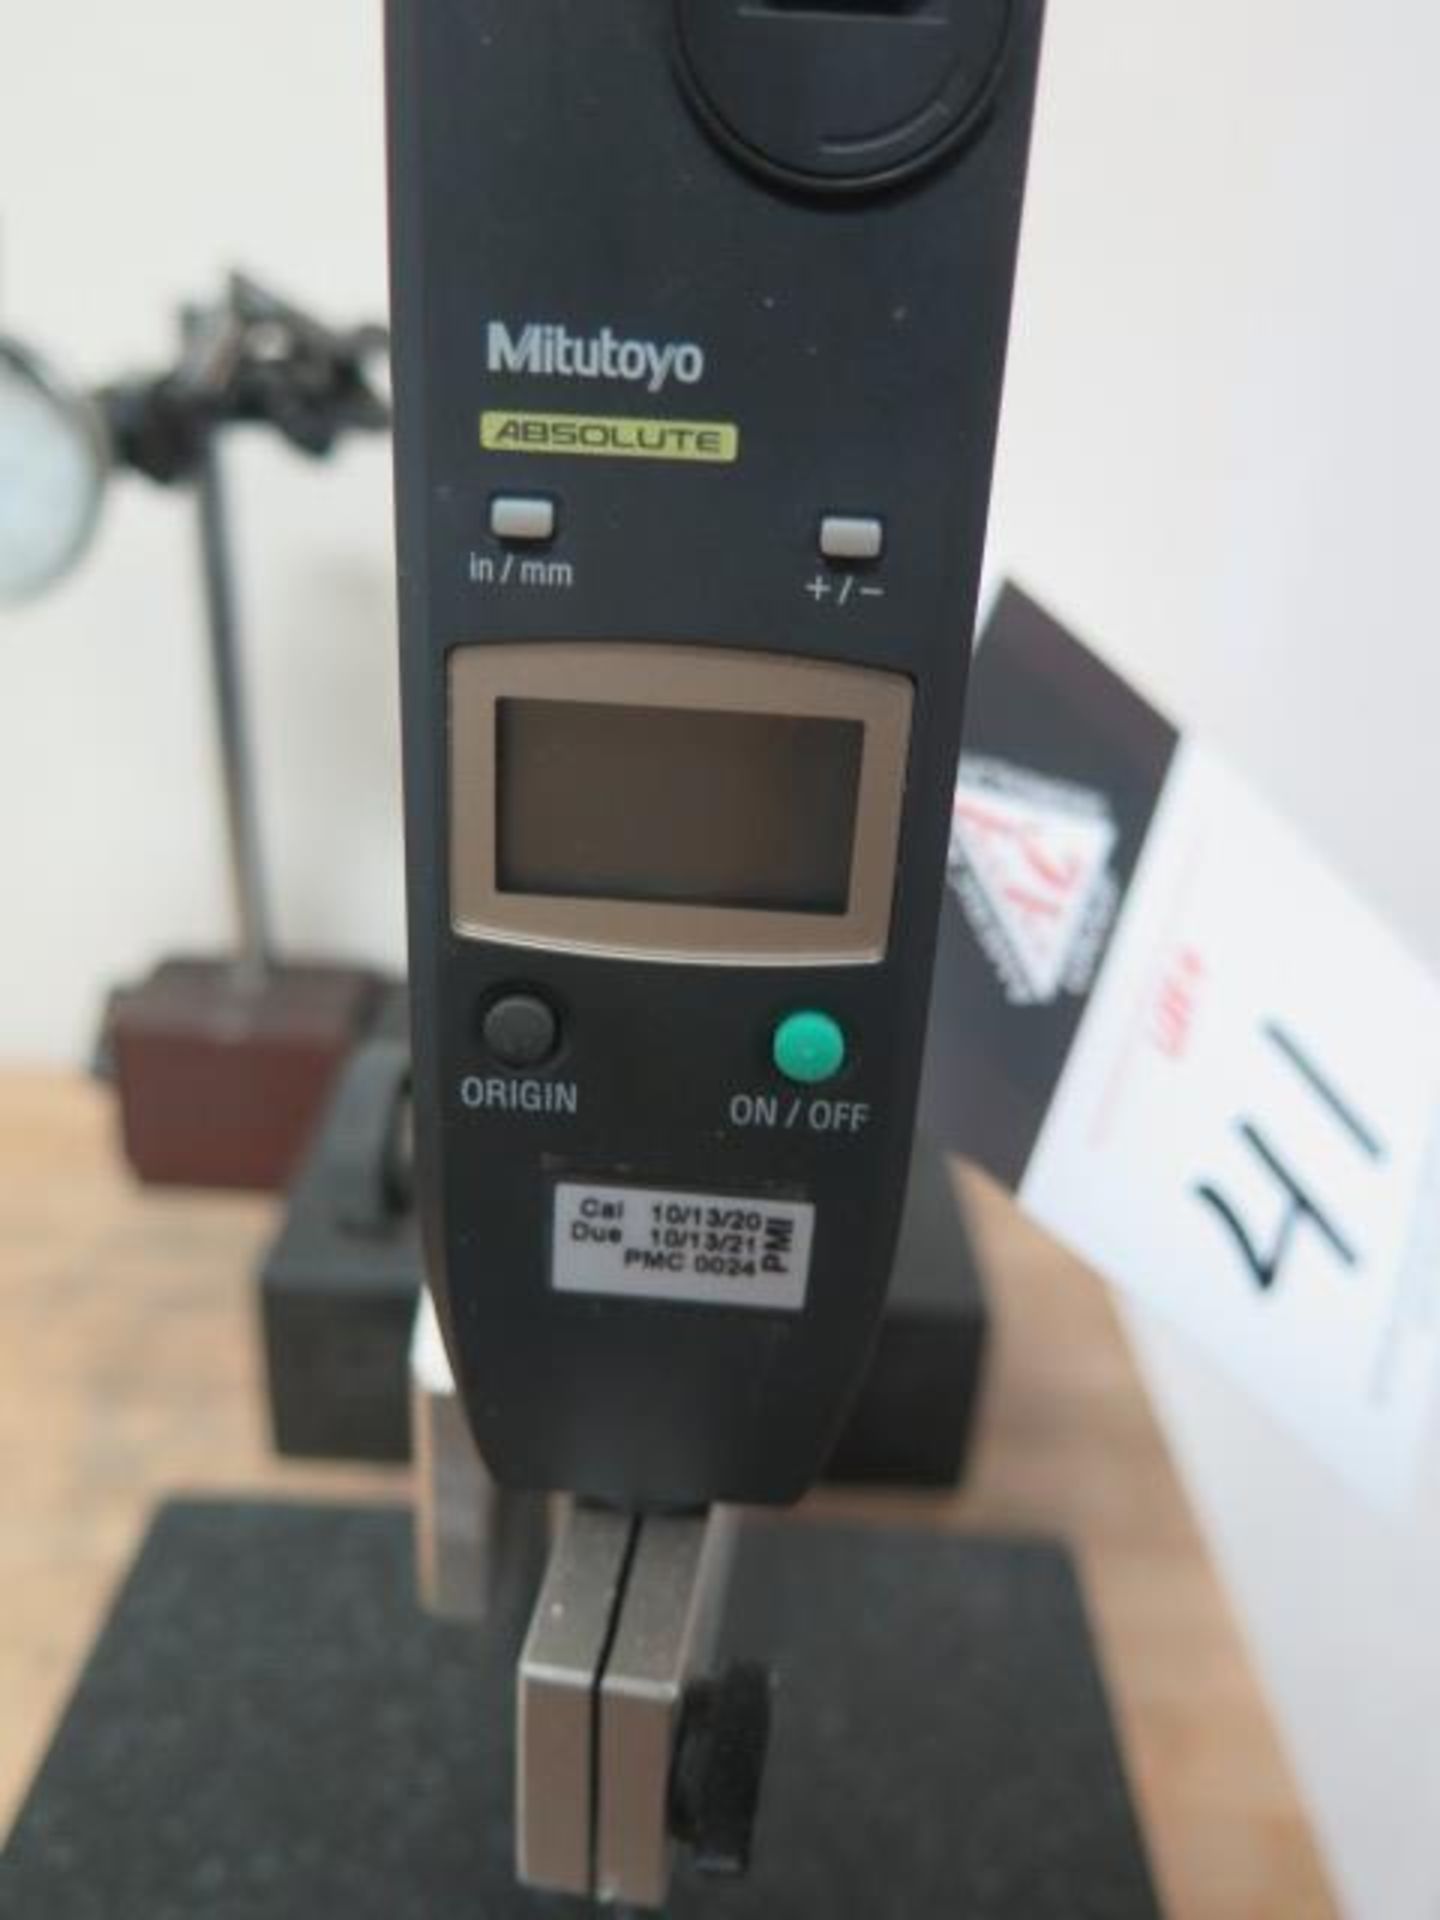 6" x 6" Granite Indicator Stand w/ Mitutoyo Digital Indicator (SOLD AS-IS - NO WARRANTY) - Image 2 of 3